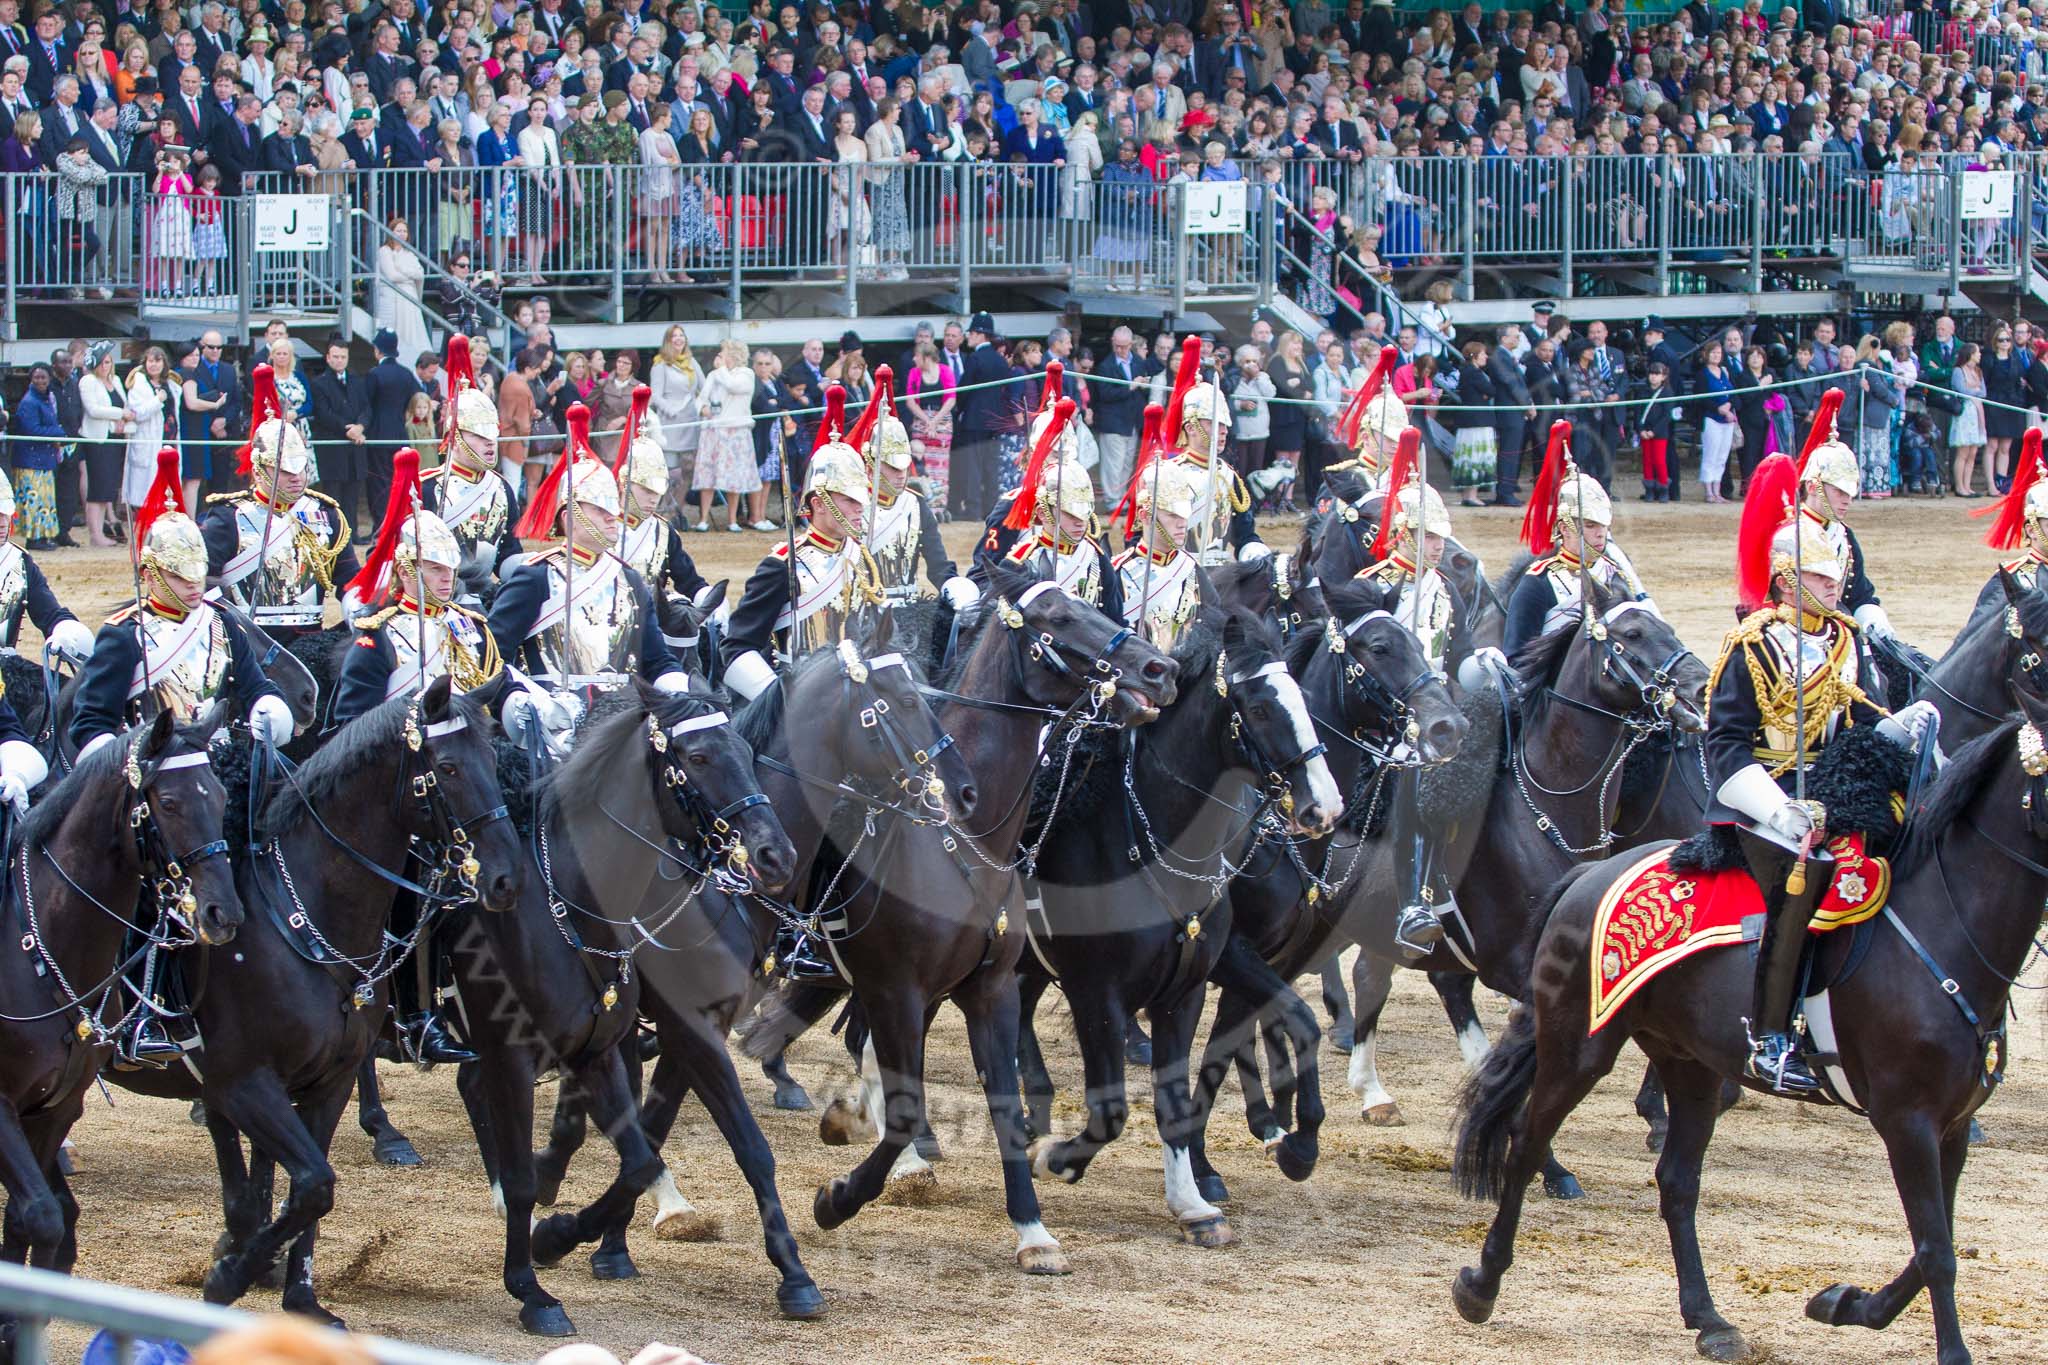 Trooping the Colour 2013: The Third and Forth Divisions of the Sovereign's Escort, The Blues and Royals, during the Ride Past. Image #731, 15 June 2013 11:59 Horse Guards Parade, London, UK